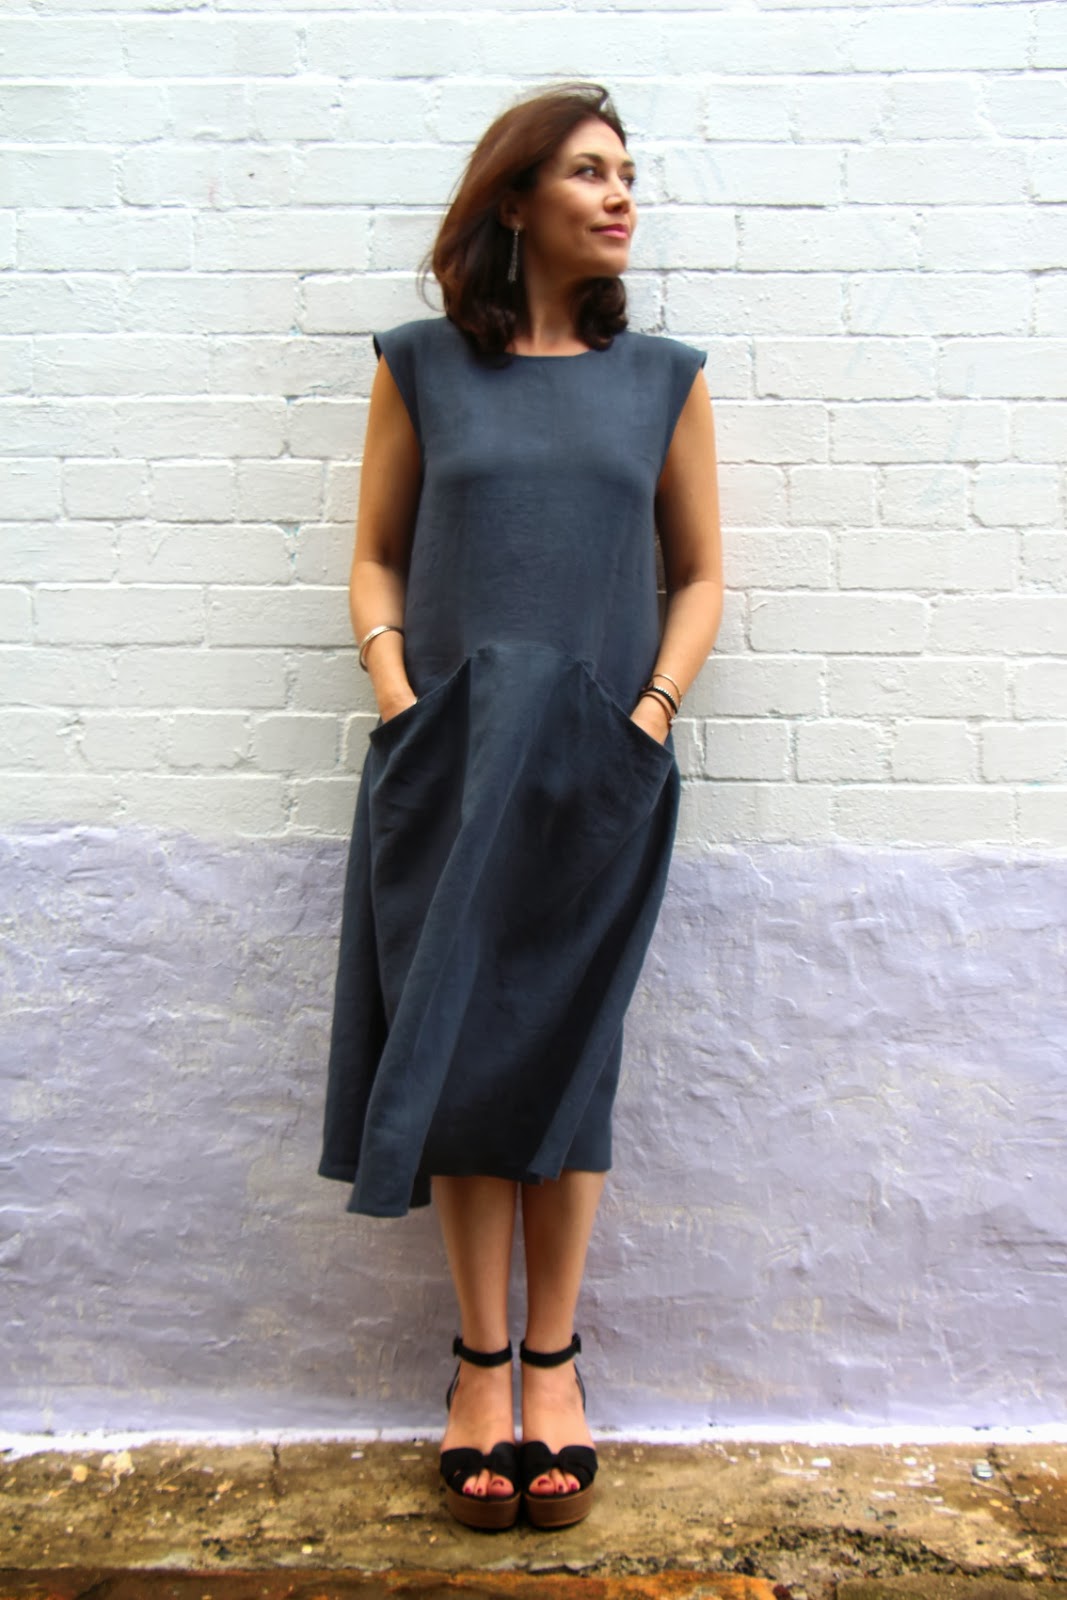 Buy the Pia Dress sewing pattern from Tessuti Fabrics on The Fold Line.